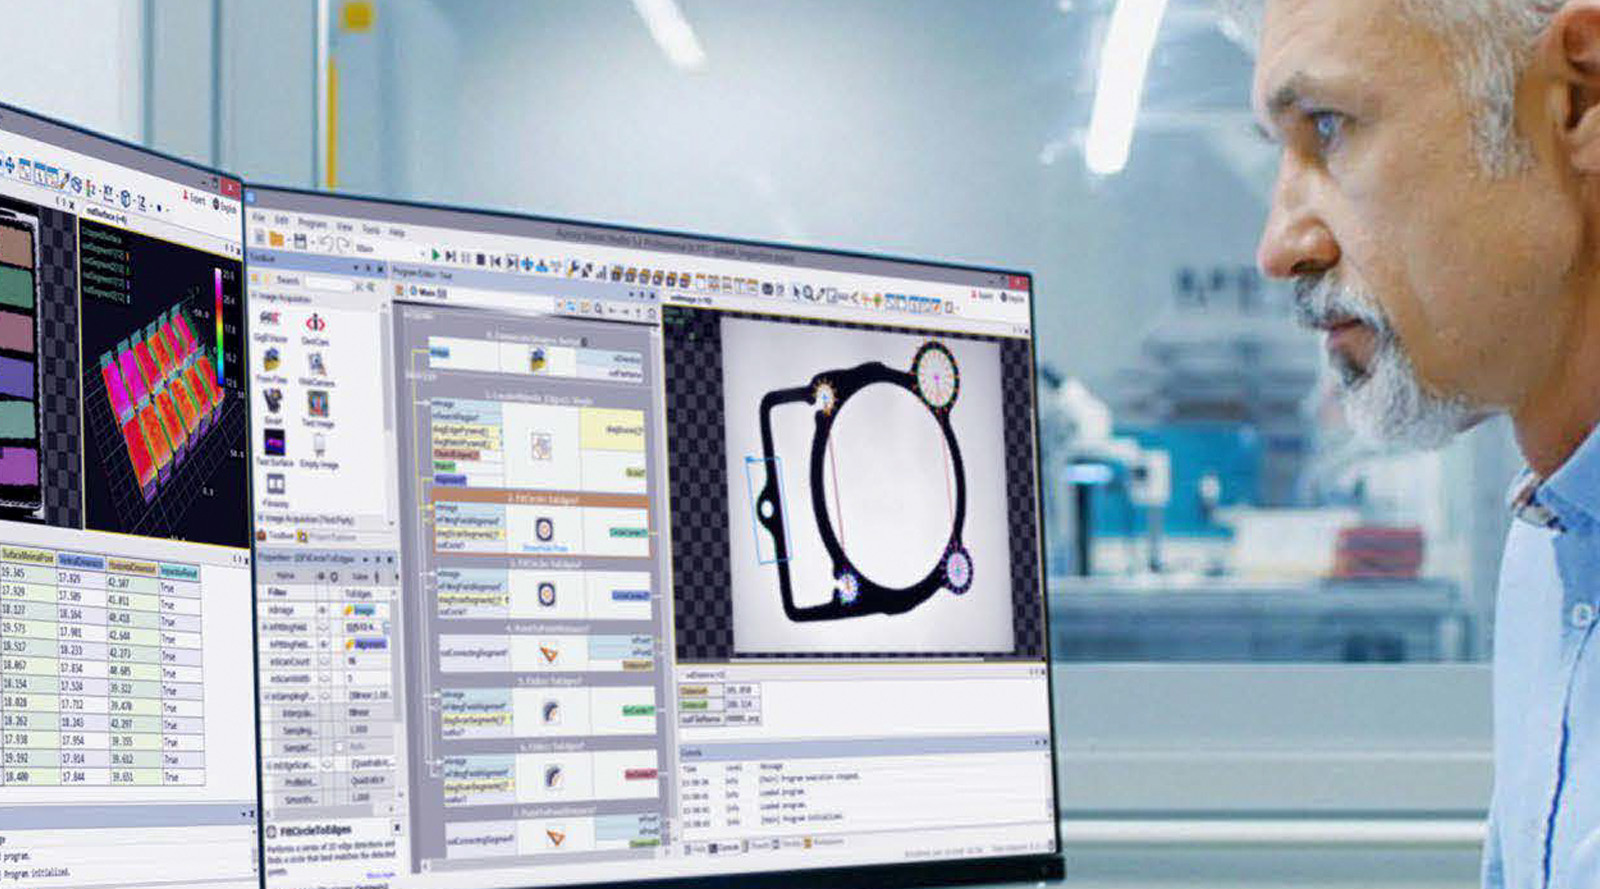 Aurora Vision for OEM by Zebra is a machine vision software designed to set up visual-based sensing for comprehensive image analysis in quality inspection and an array of machine vision applications.